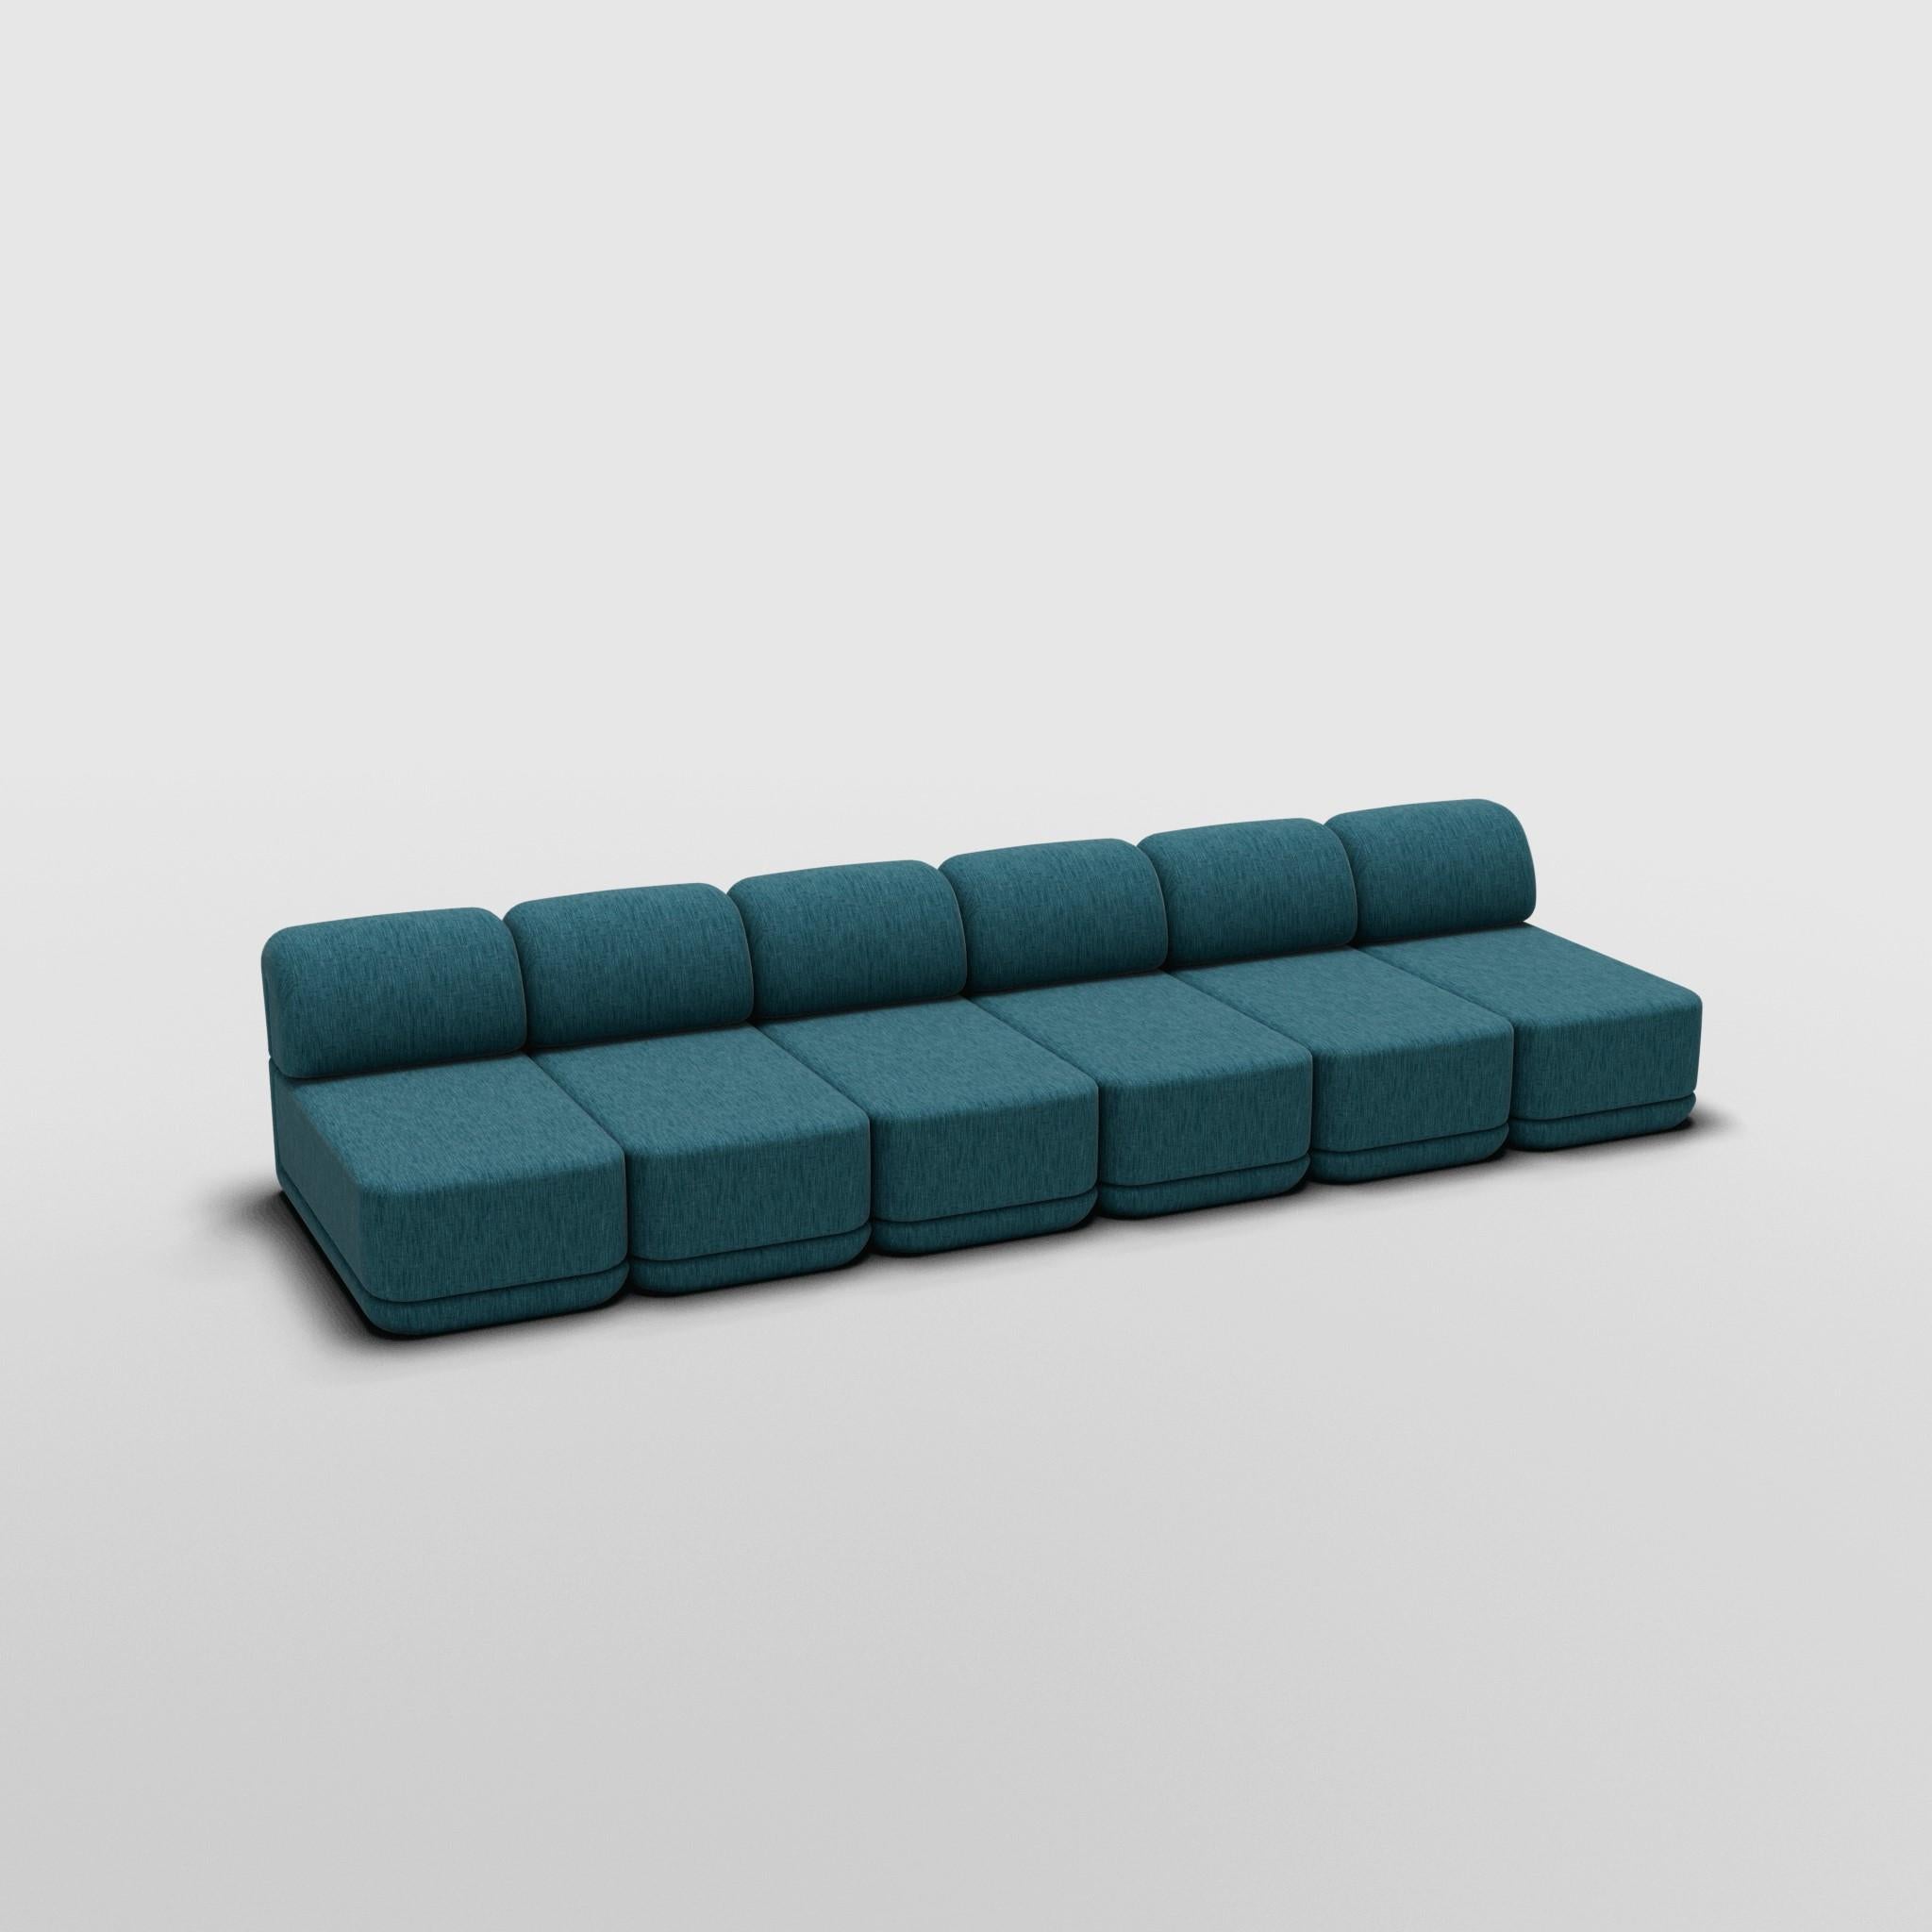 Slim Caterpillar - Inspired by 70s Italian Luxury Furniture

Discover The Cube Sofa, where art meets adaptability. Its sculptural design and customizable comfort create endless possibilities for your living space. Make a statement, elevate your